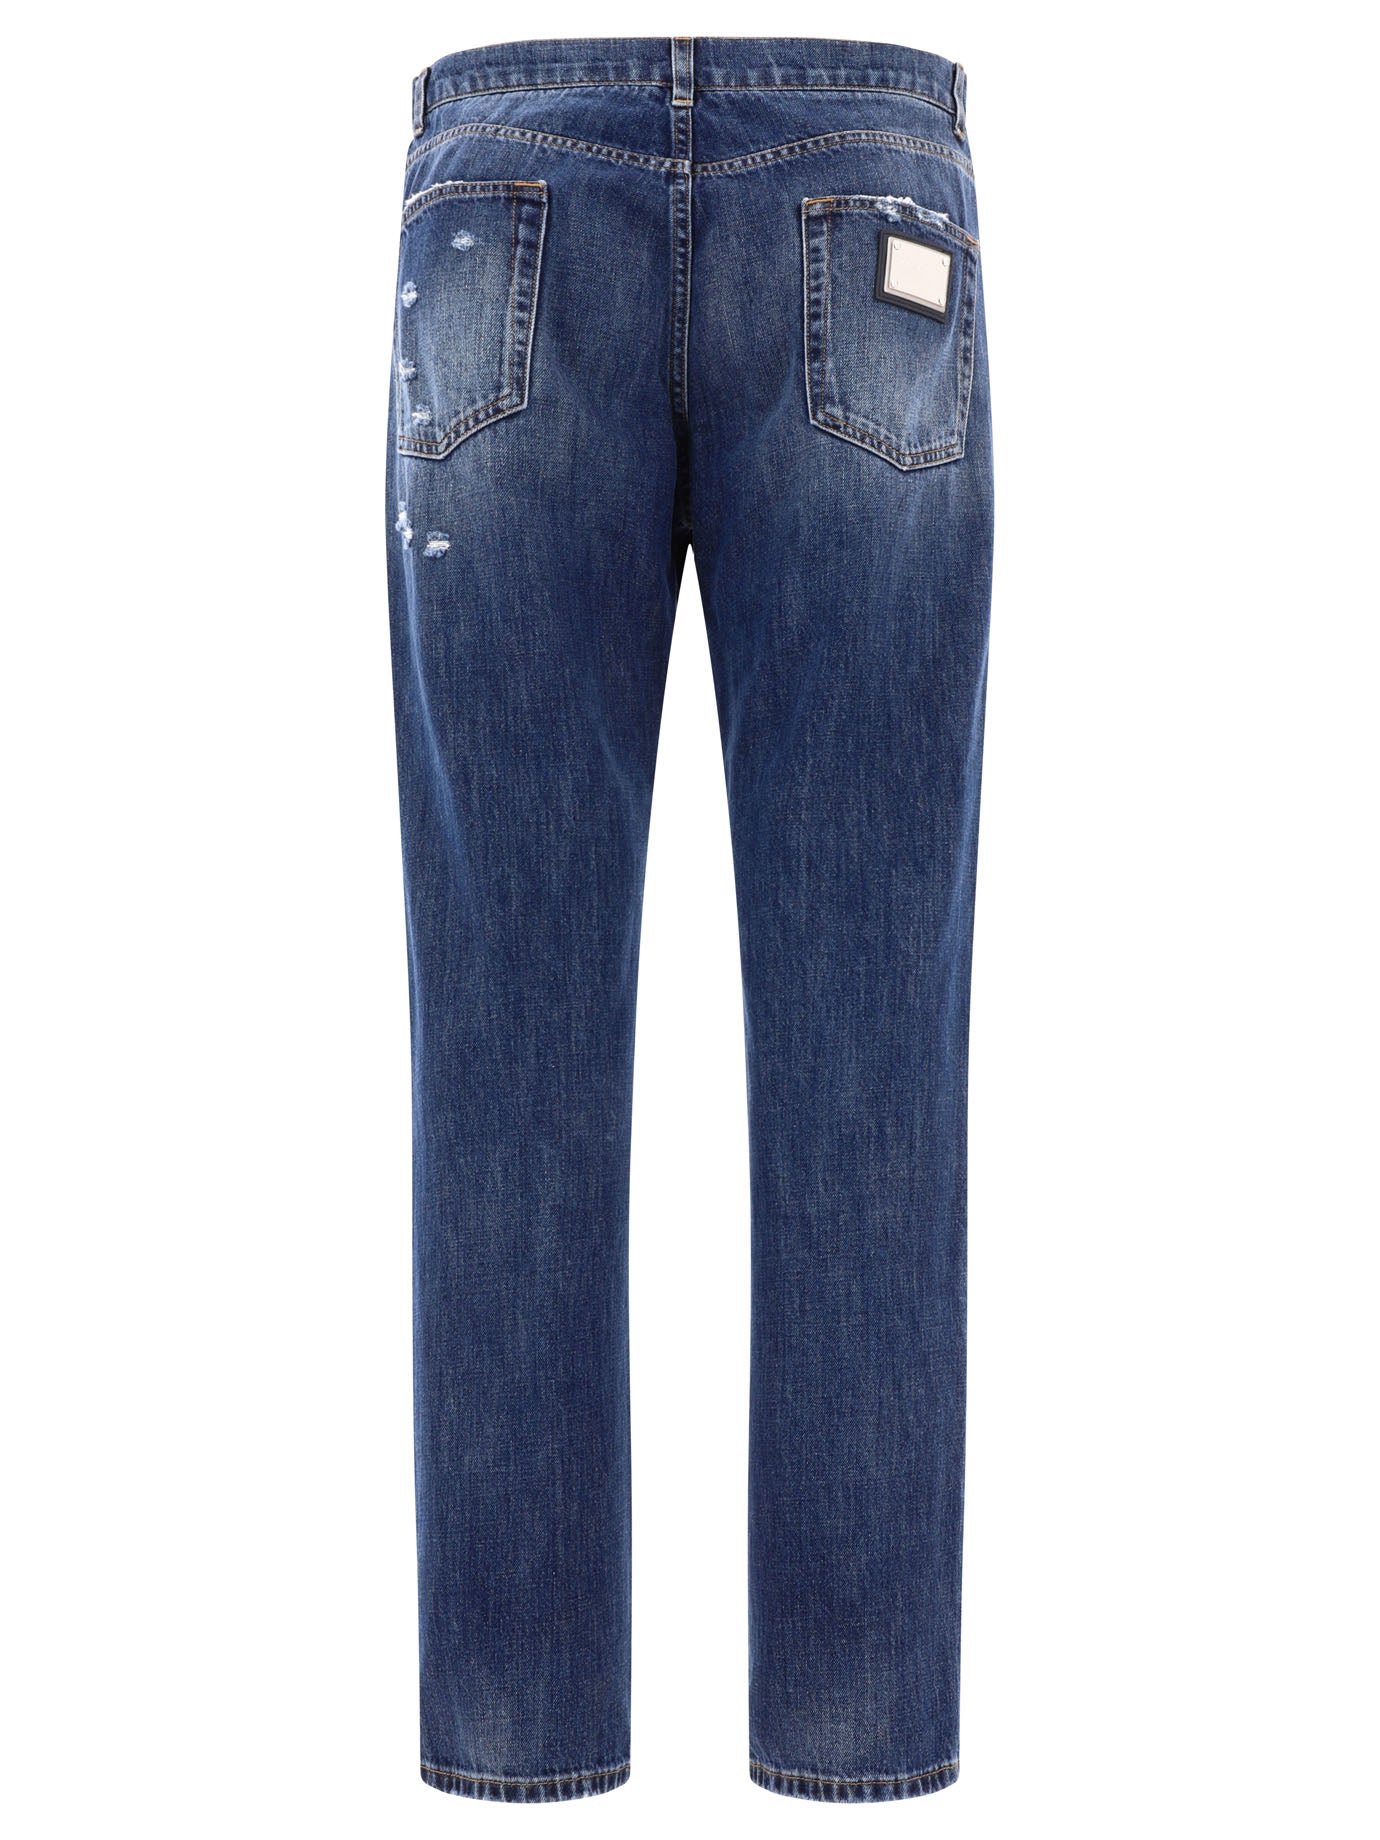 Shop Dolce & Gabbana Stylish Men's Straight Leg Jeans In Ripped Details In Blue